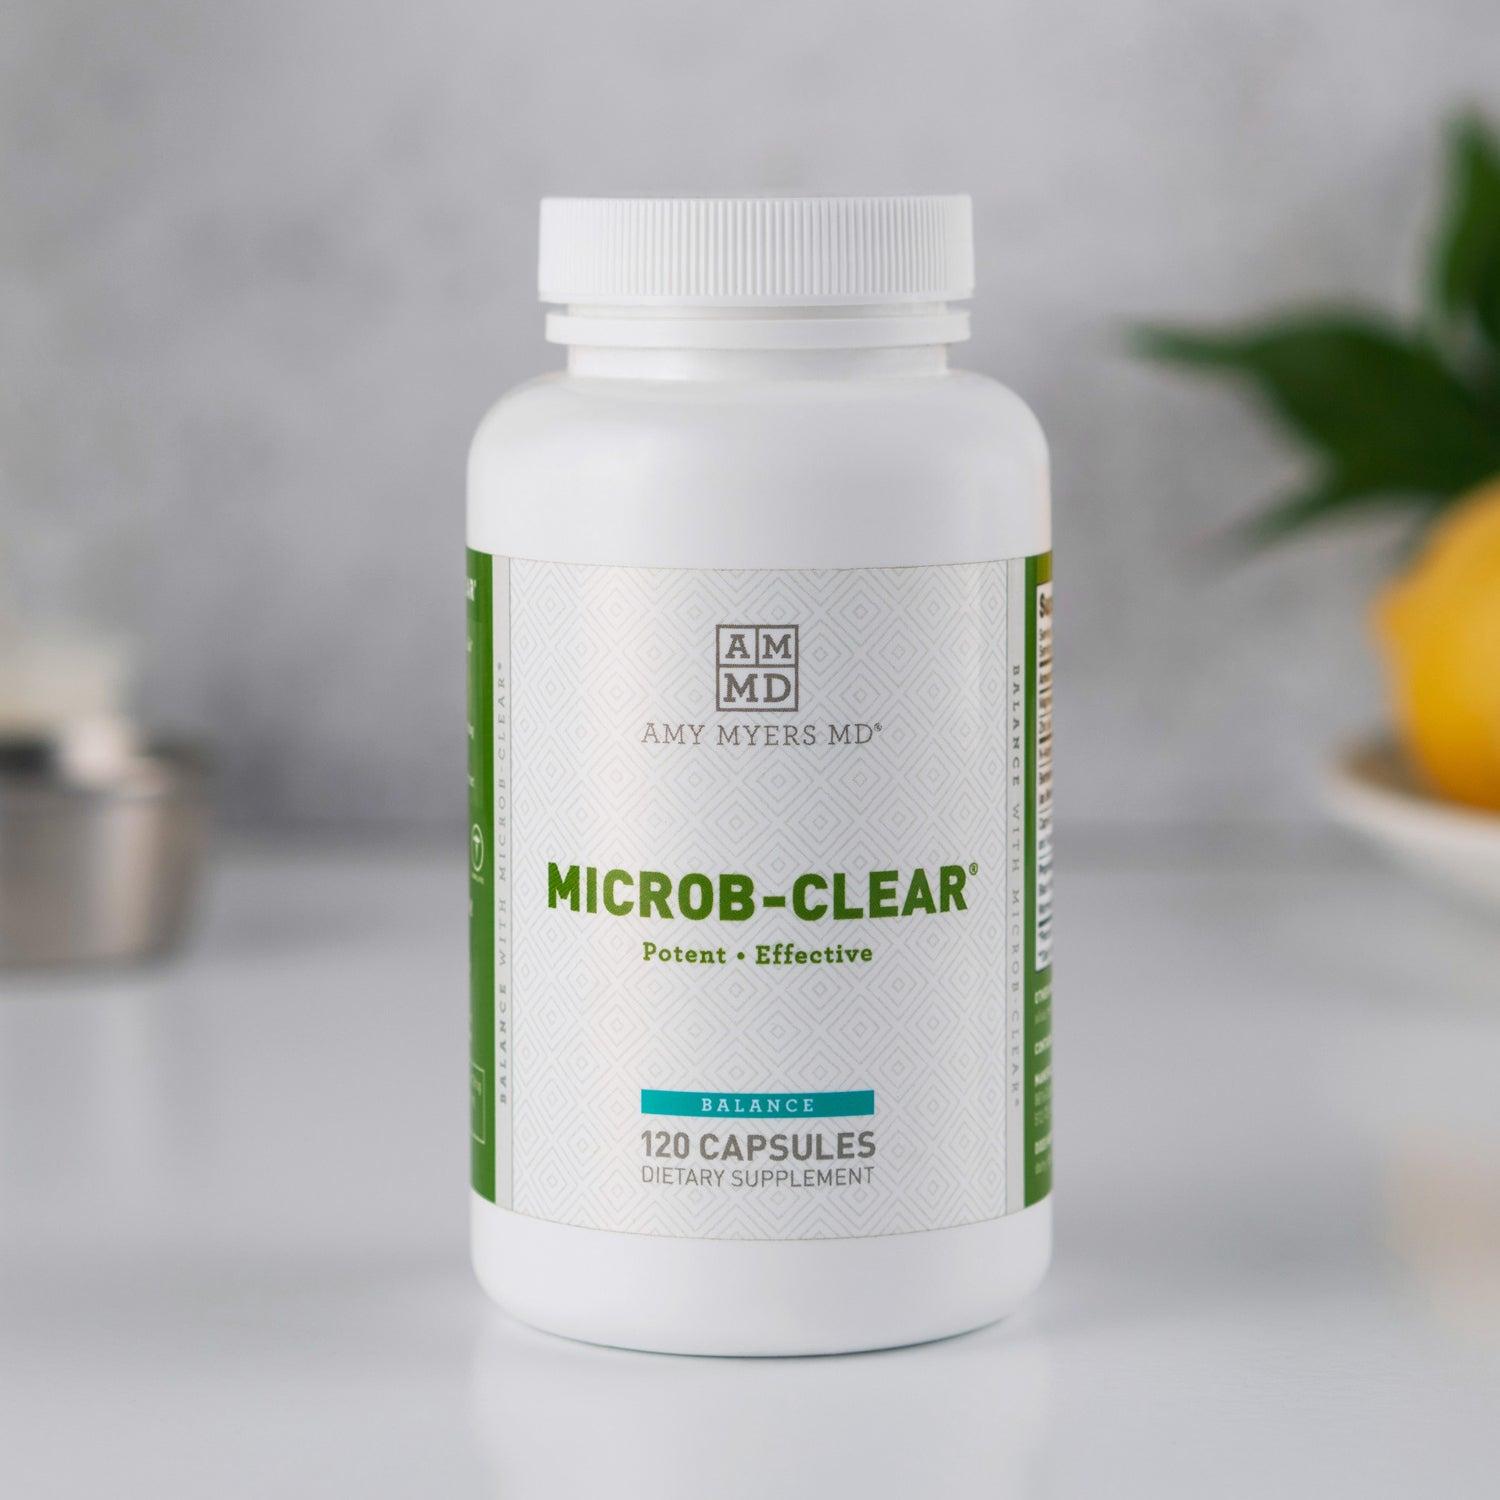 Microb clear to support microbe balance in the GI tract - Amy Myers MD®